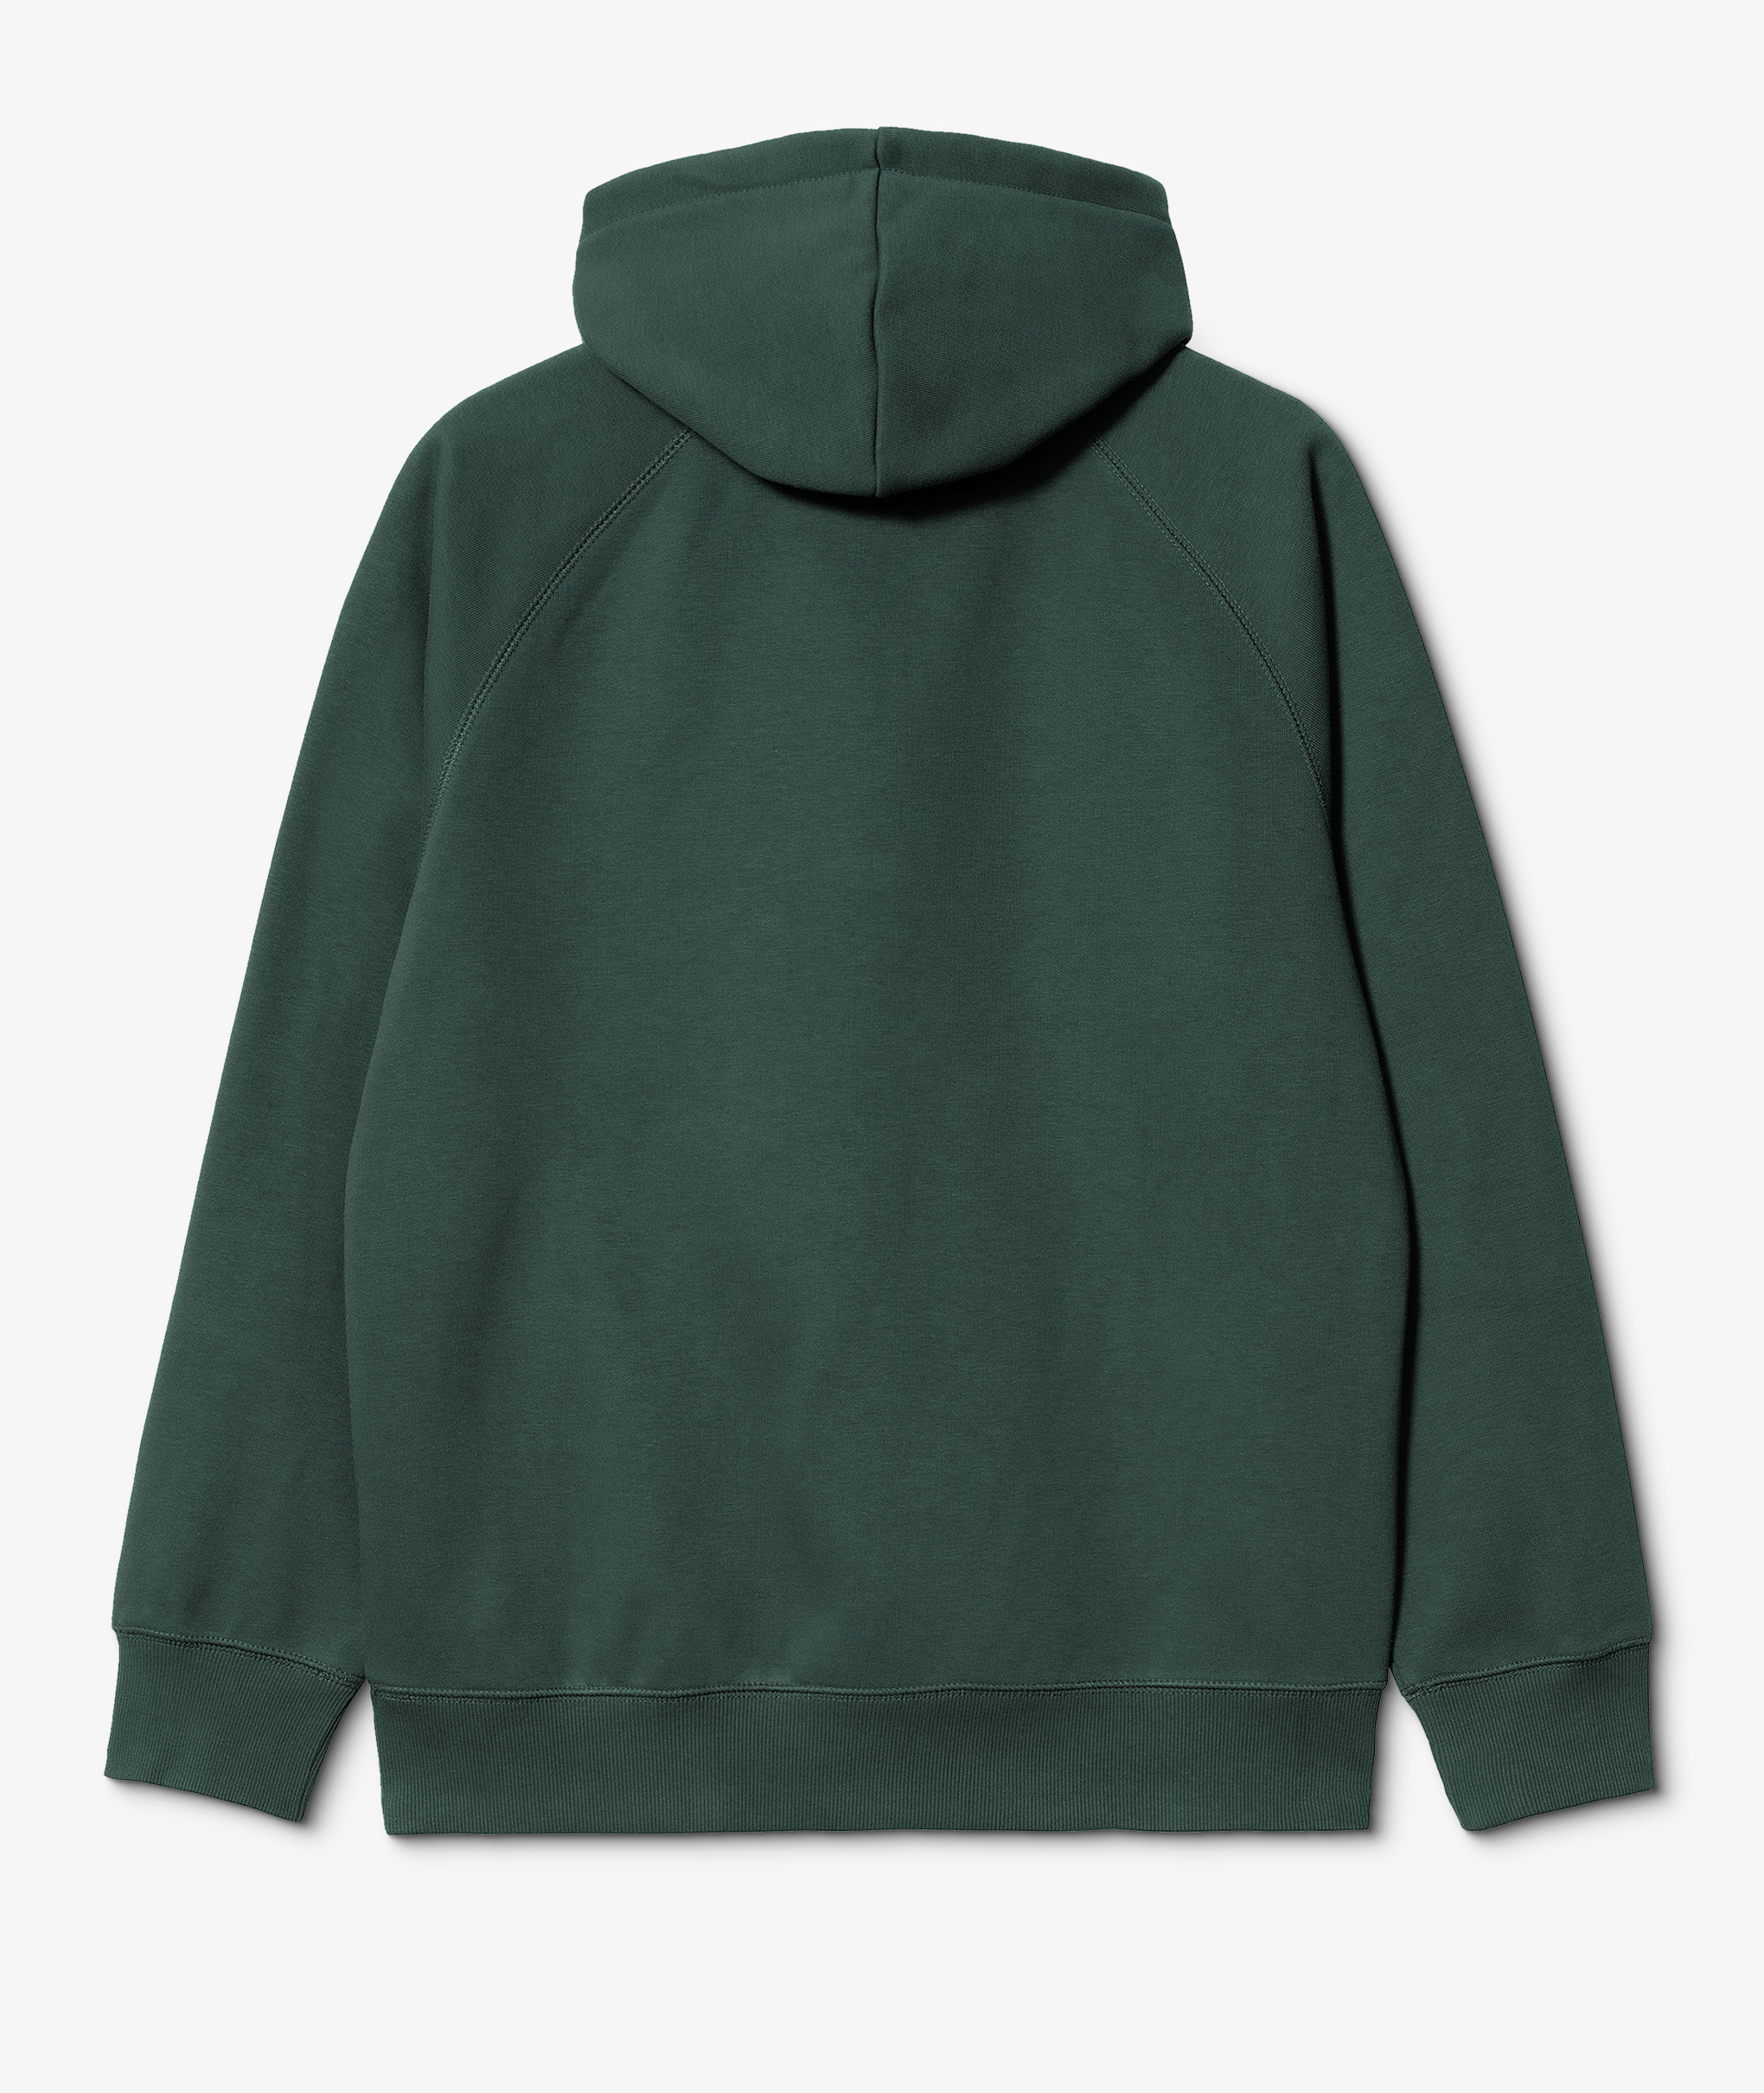 Norse Store | Shipping Worldwide - Carhartt WIP Hooded Chase Sweat ...